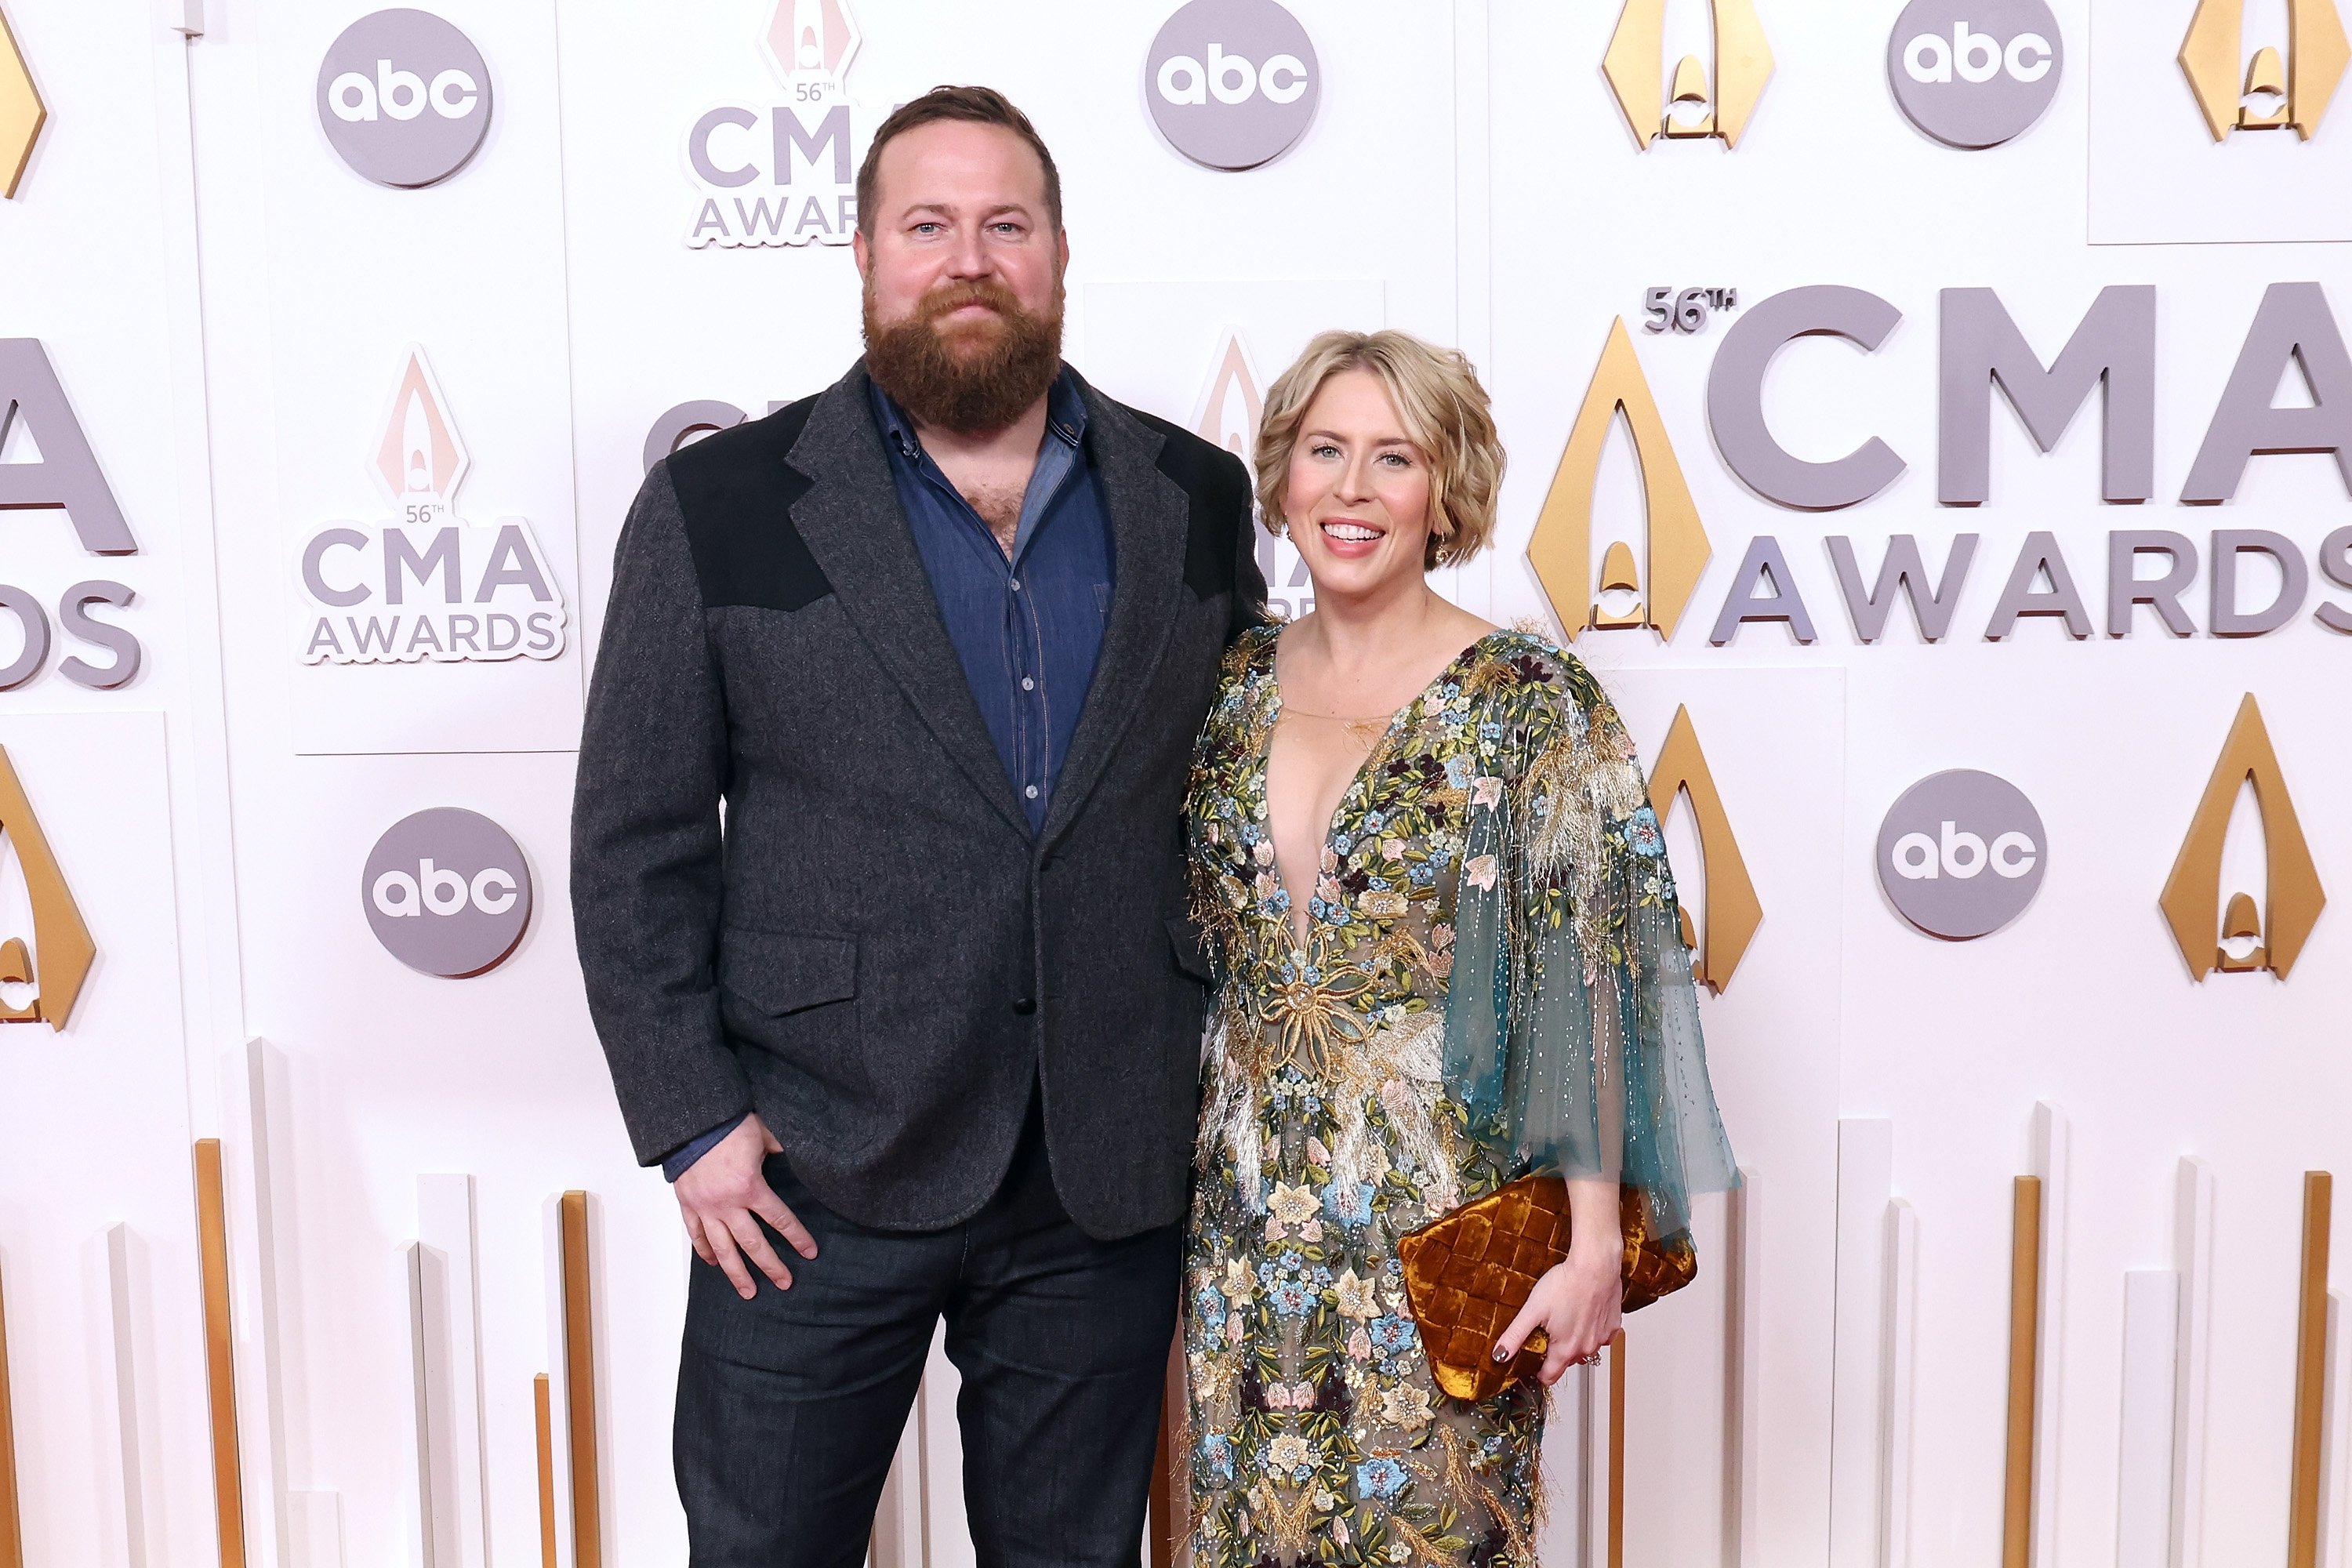 HGTV stars Ben Napier and Erin Napier attend the 56th Annual CMA Awards at Bridgestone Arena on November 9, 2022 in Nashville, Tennessee ┃Source: Getty Images